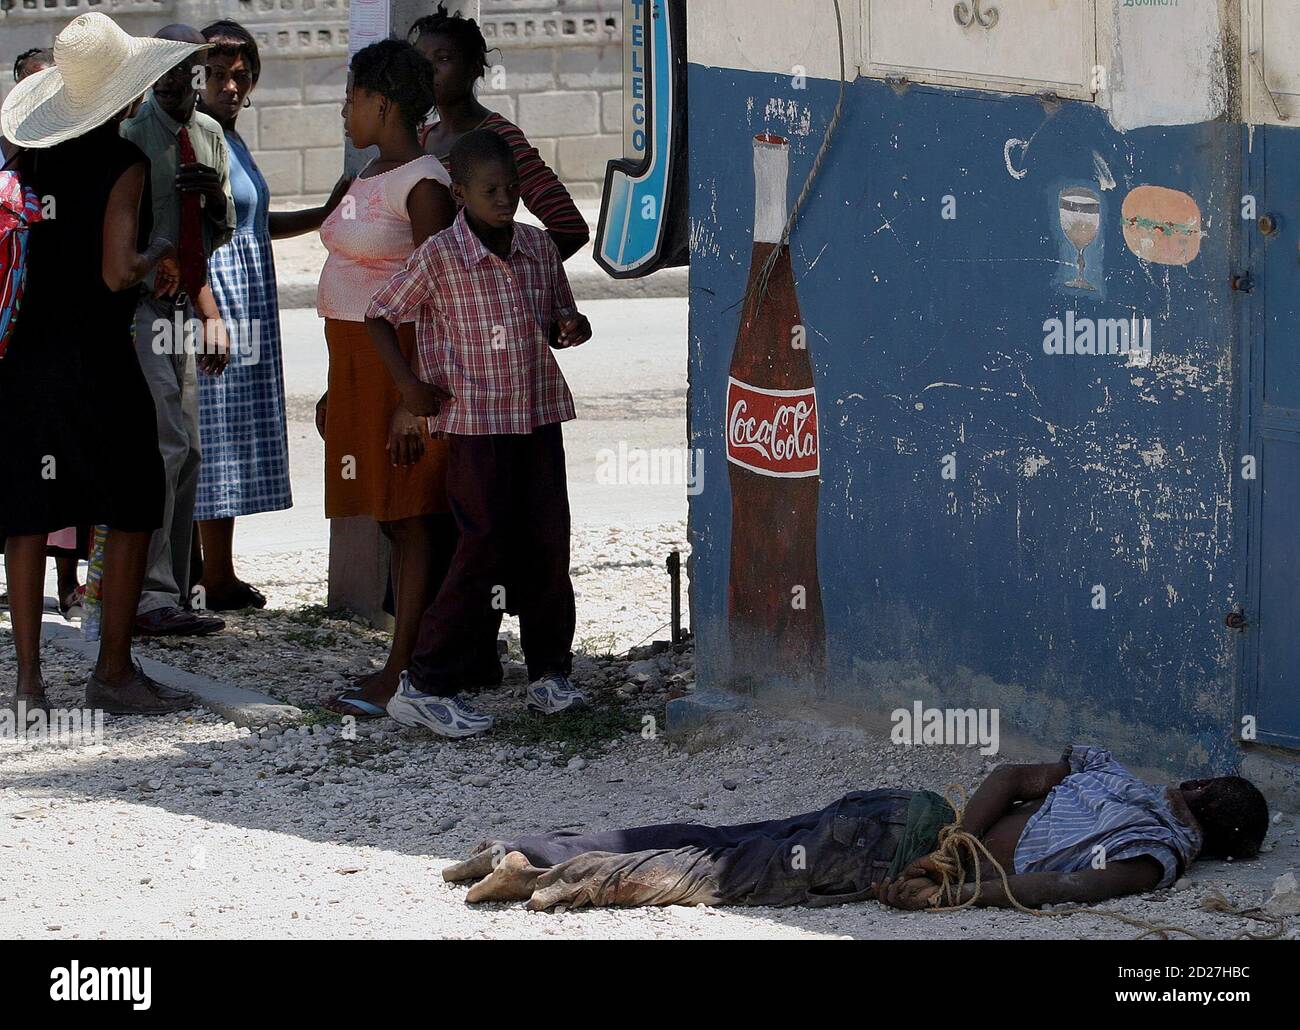 Haitian boy looks at at a body, which has its hands tied up, in the neighborhood of Bel-Air in Port-Au-Prince, Haiti September 20, 2005. Two men were stoned and hacked to death in the volatile neighborhood on Tuesday. A resident who said he witnessed the killings, said the victims belonged to armed gangs and were attacked by the neighborhood's residents. REUTERS/Eduardo Munoz Stock Photo